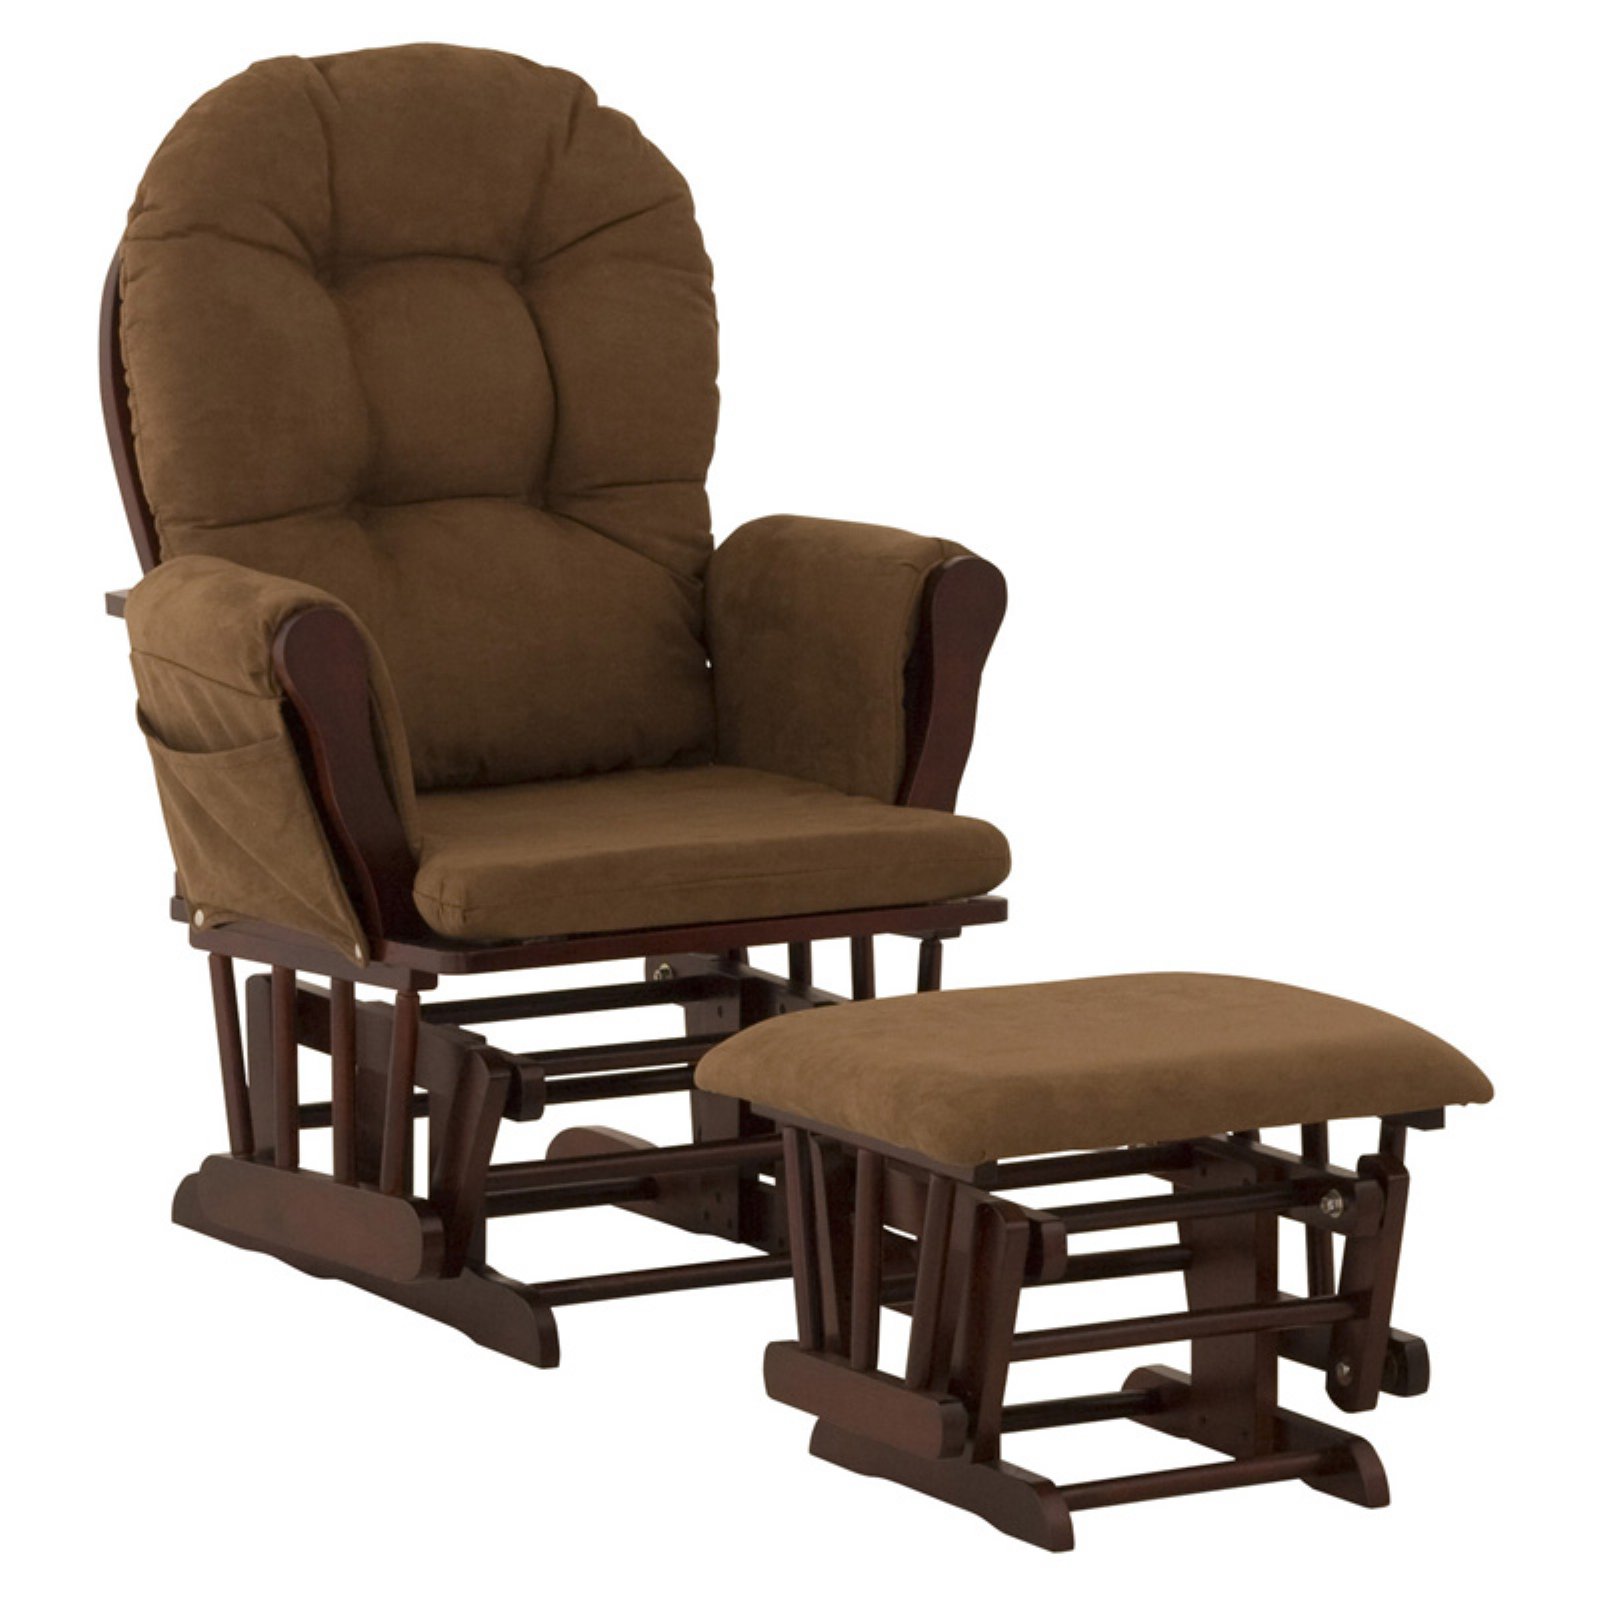 Storkcraft Hoop Glider and Ottoman Espresso with Chocolate Cushions - image 1 of 5